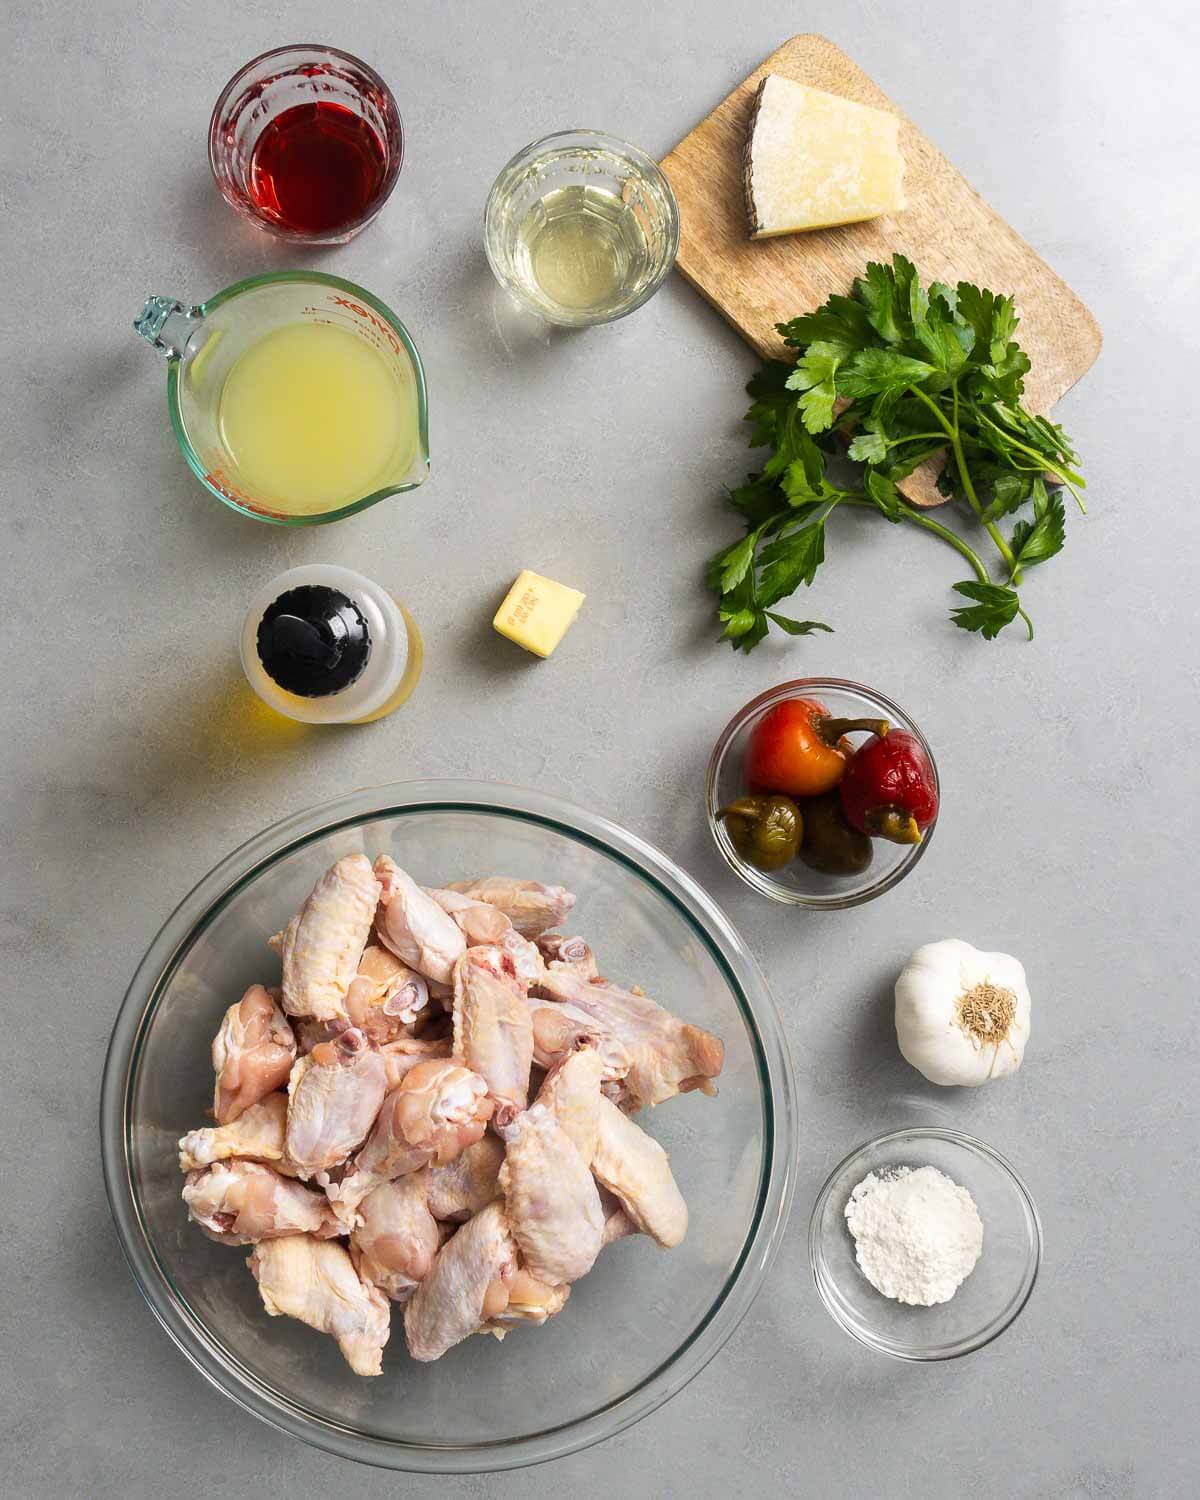 Ingredients shown: vinegar, chicken stock, wine, Pecorino Romano, parsley, butter, olive oil, chicken wings, cherry peppers, garlic, and flour.